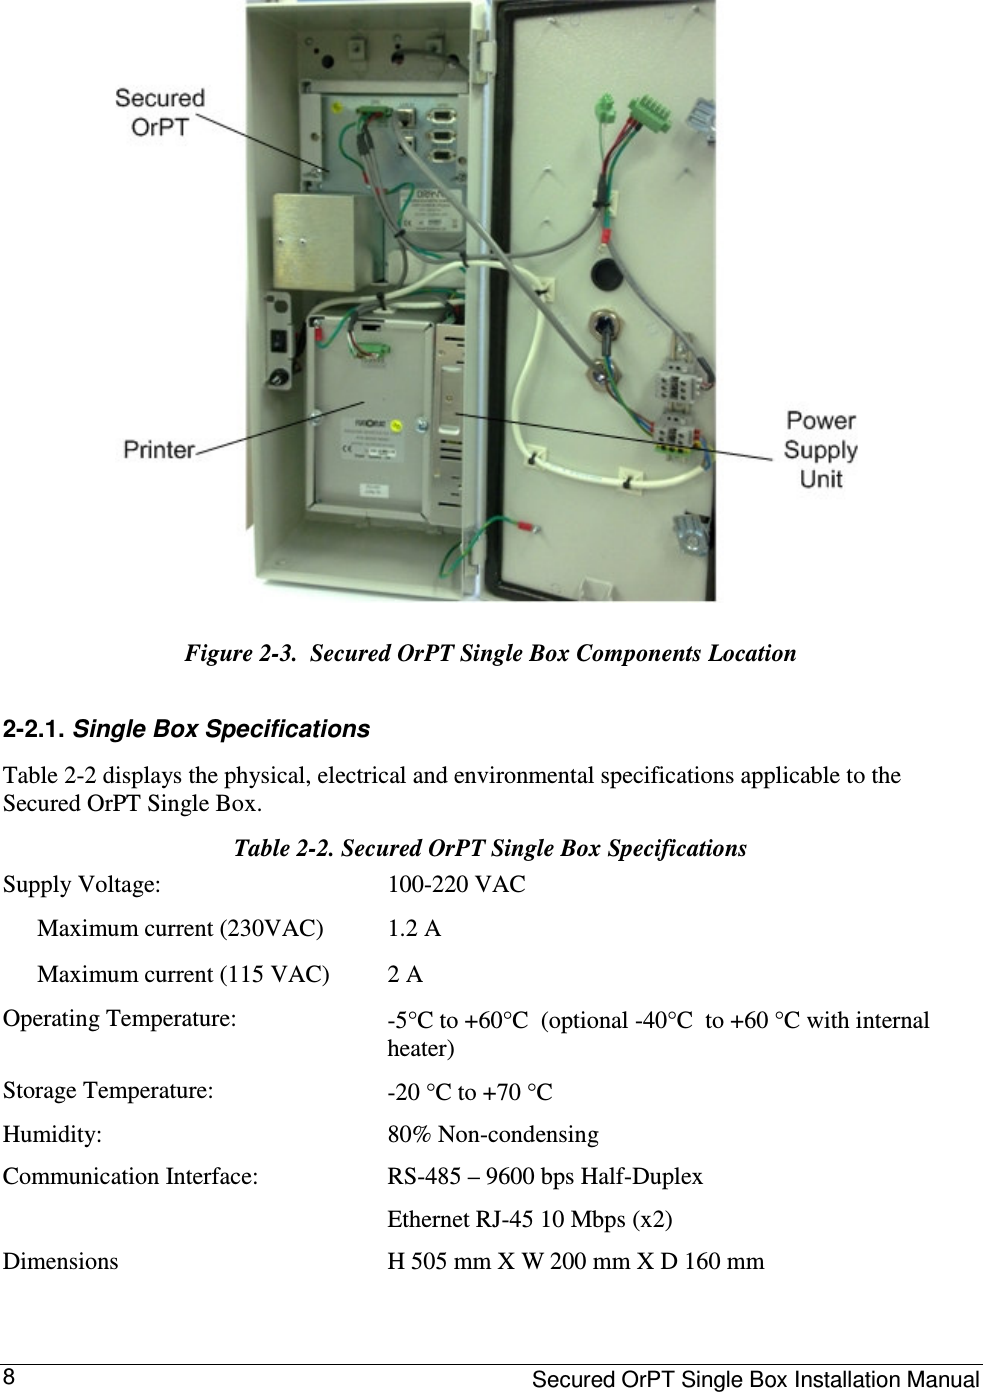     Secured OrPT Single Box Installation Manual 8  Figure  2-3.  Secured OrPT Single Box Components Location 2-2.1. Single Box Specifications Table  2-2 displays the physical, electrical and environmental specifications applicable to the Secured OrPT Single Box. Table  2-2. Secured OrPT Single Box Specifications Supply Voltage:   100-220 VAC    Maximum current (230VAC)   Maximum current (115 VAC) 1.2 A 2 A  Operating Temperature:   -5°C to +60°C  (optional -40°C  to +60 °C with internal heater) Storage Temperature:   -20 °C to +70 °C  Humidity:   80% Non-condensing  Communication Interface:   RS-485 – 9600 bps Half-Duplex  Ethernet RJ-45 10 Mbps (x2)  Dimensions  H 505 mm X W 200 mm X D 160 mm 